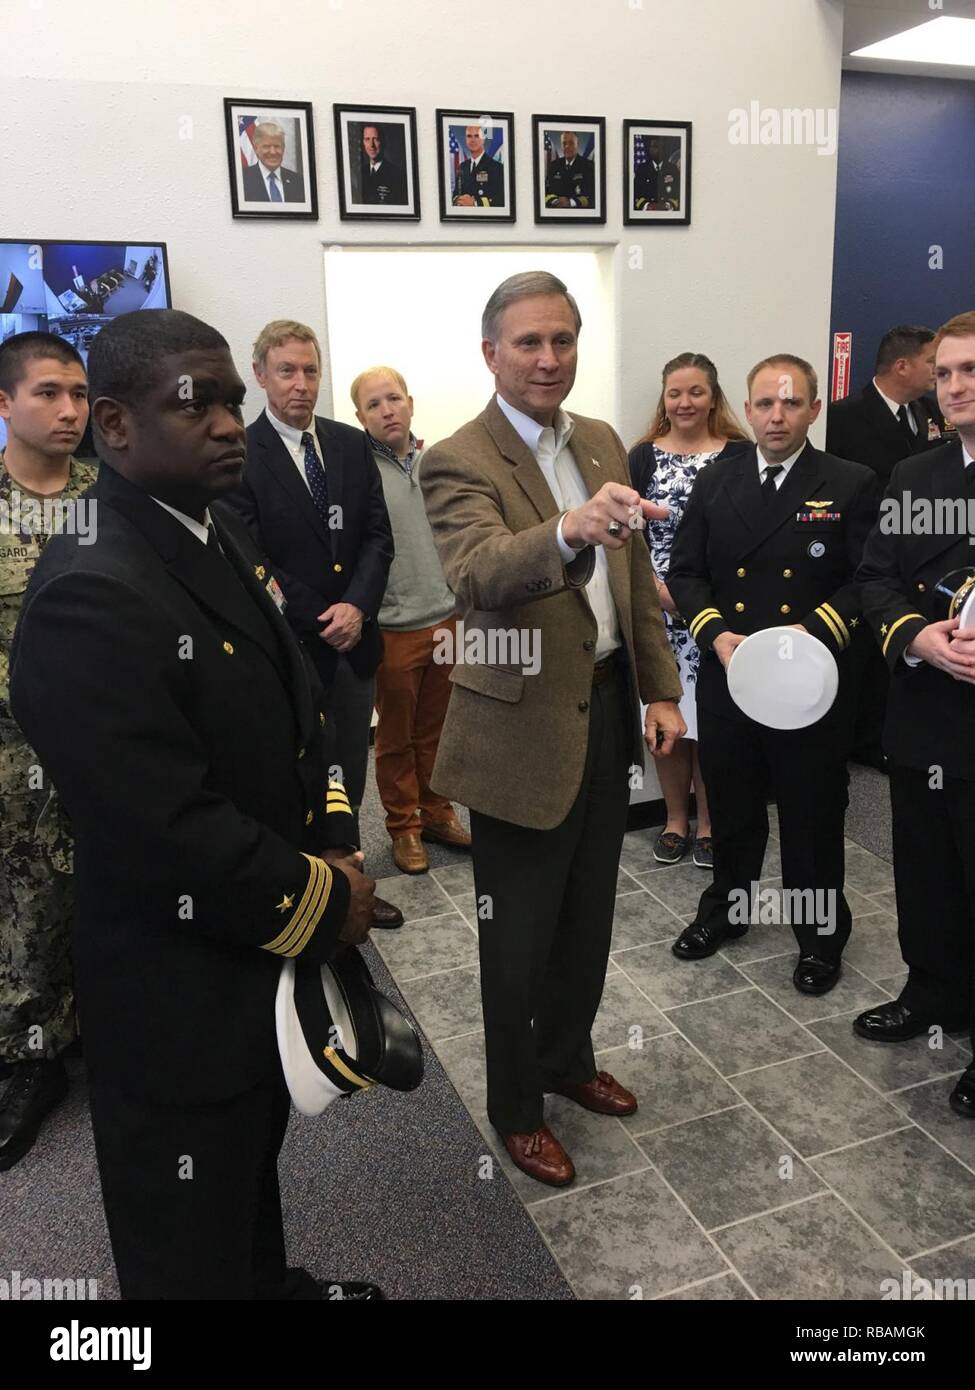 OKLAHOMA CITY (Dec. 27, 2018) Assistant Secretary of the Navy (Manpower and Reserve Affairs) and retired Rear Adm. Gregory J. Slavonic takes a tour of the newest Navy Officer Recruiting Station (NORS) in Oklahoma. NORS Oklahoma is the first and only Navy Officer Recruiting Station in the state and is assigned to Navy Recruiting District (NRD) Dallas. Stock Photo